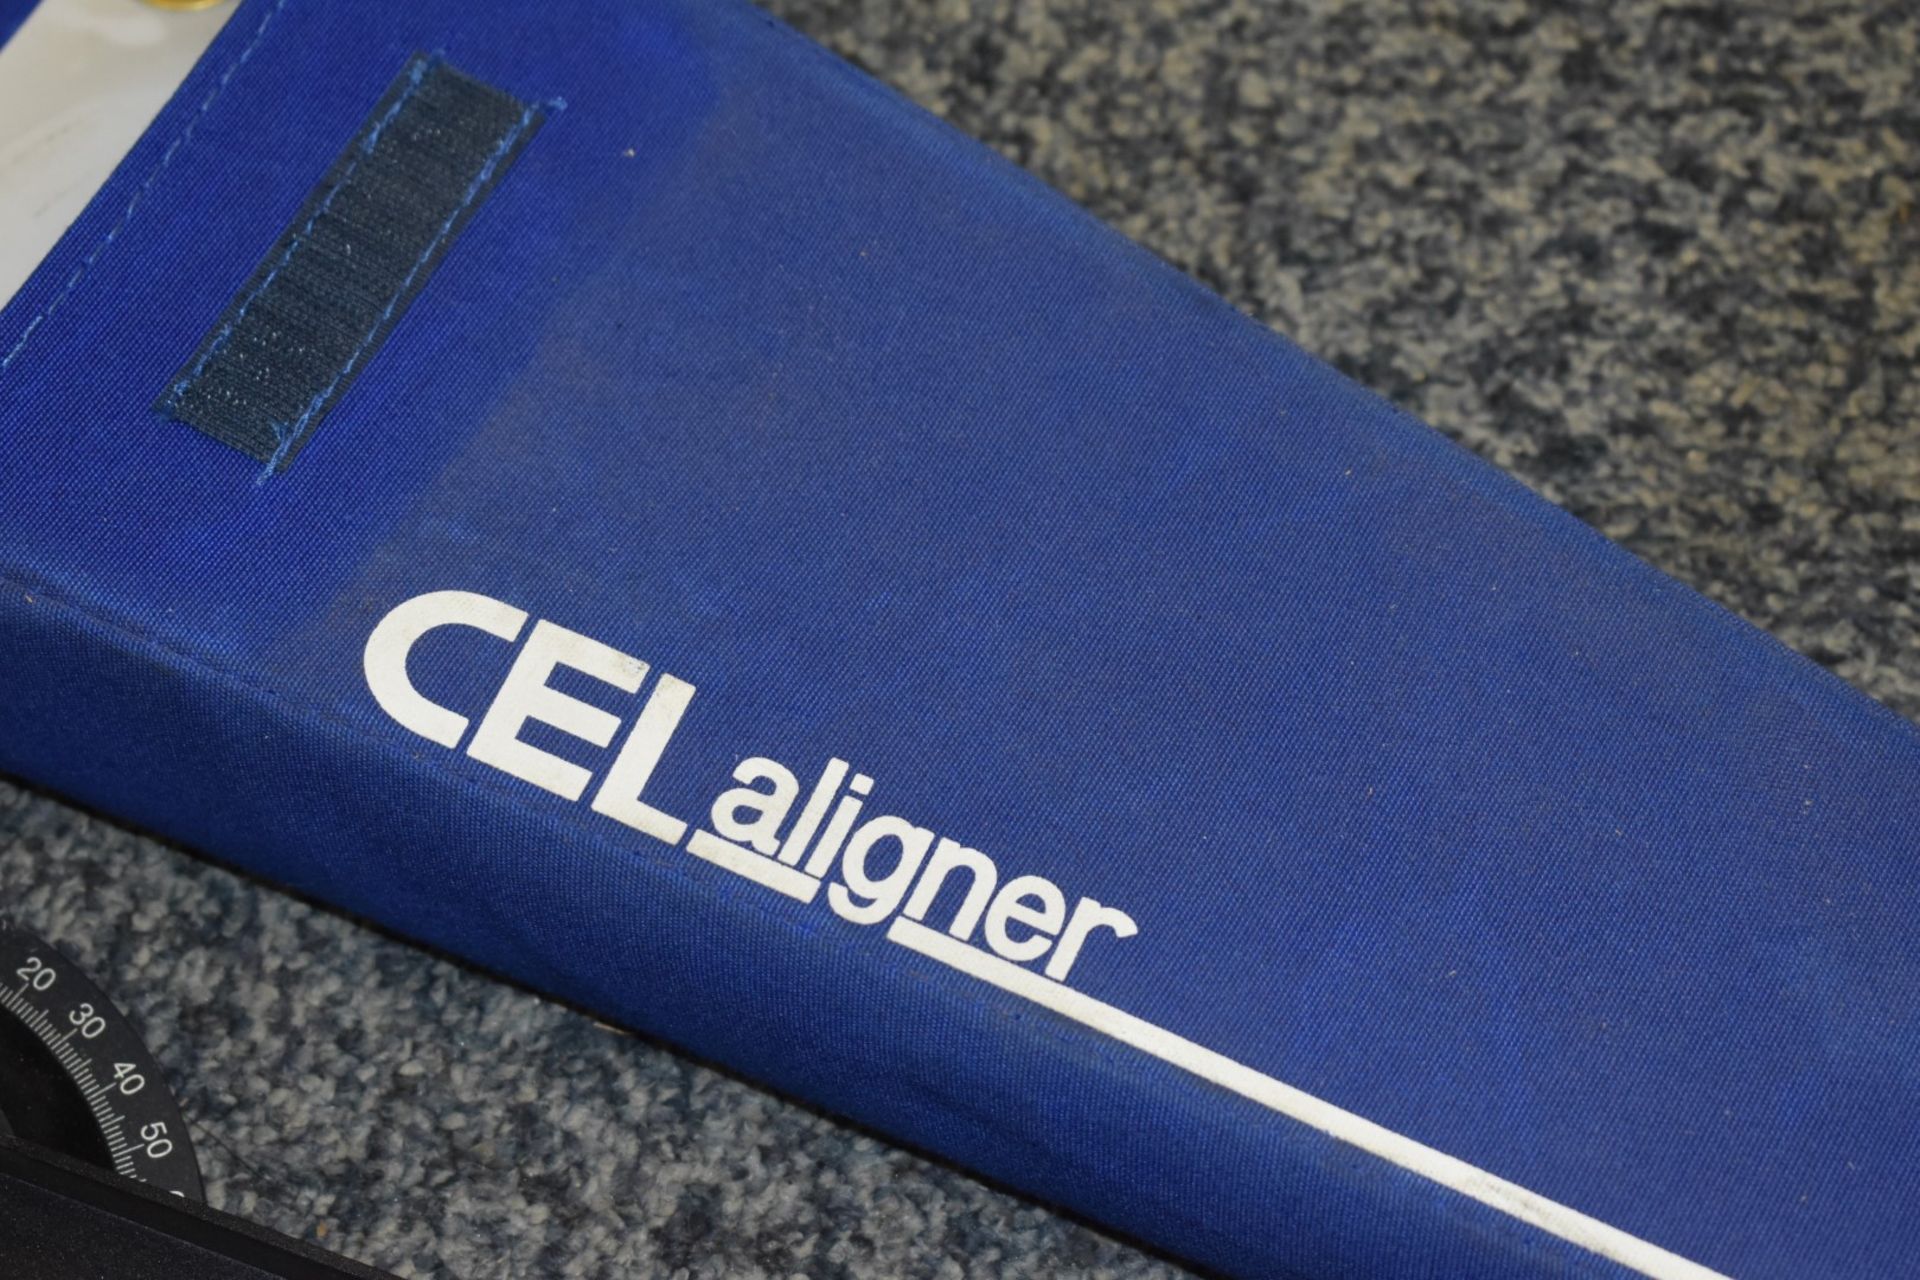 1 x Celwave CELaligner With Carry Case - Dual Function Tool for Alignment of Panel Antennas - Ref - Image 5 of 5